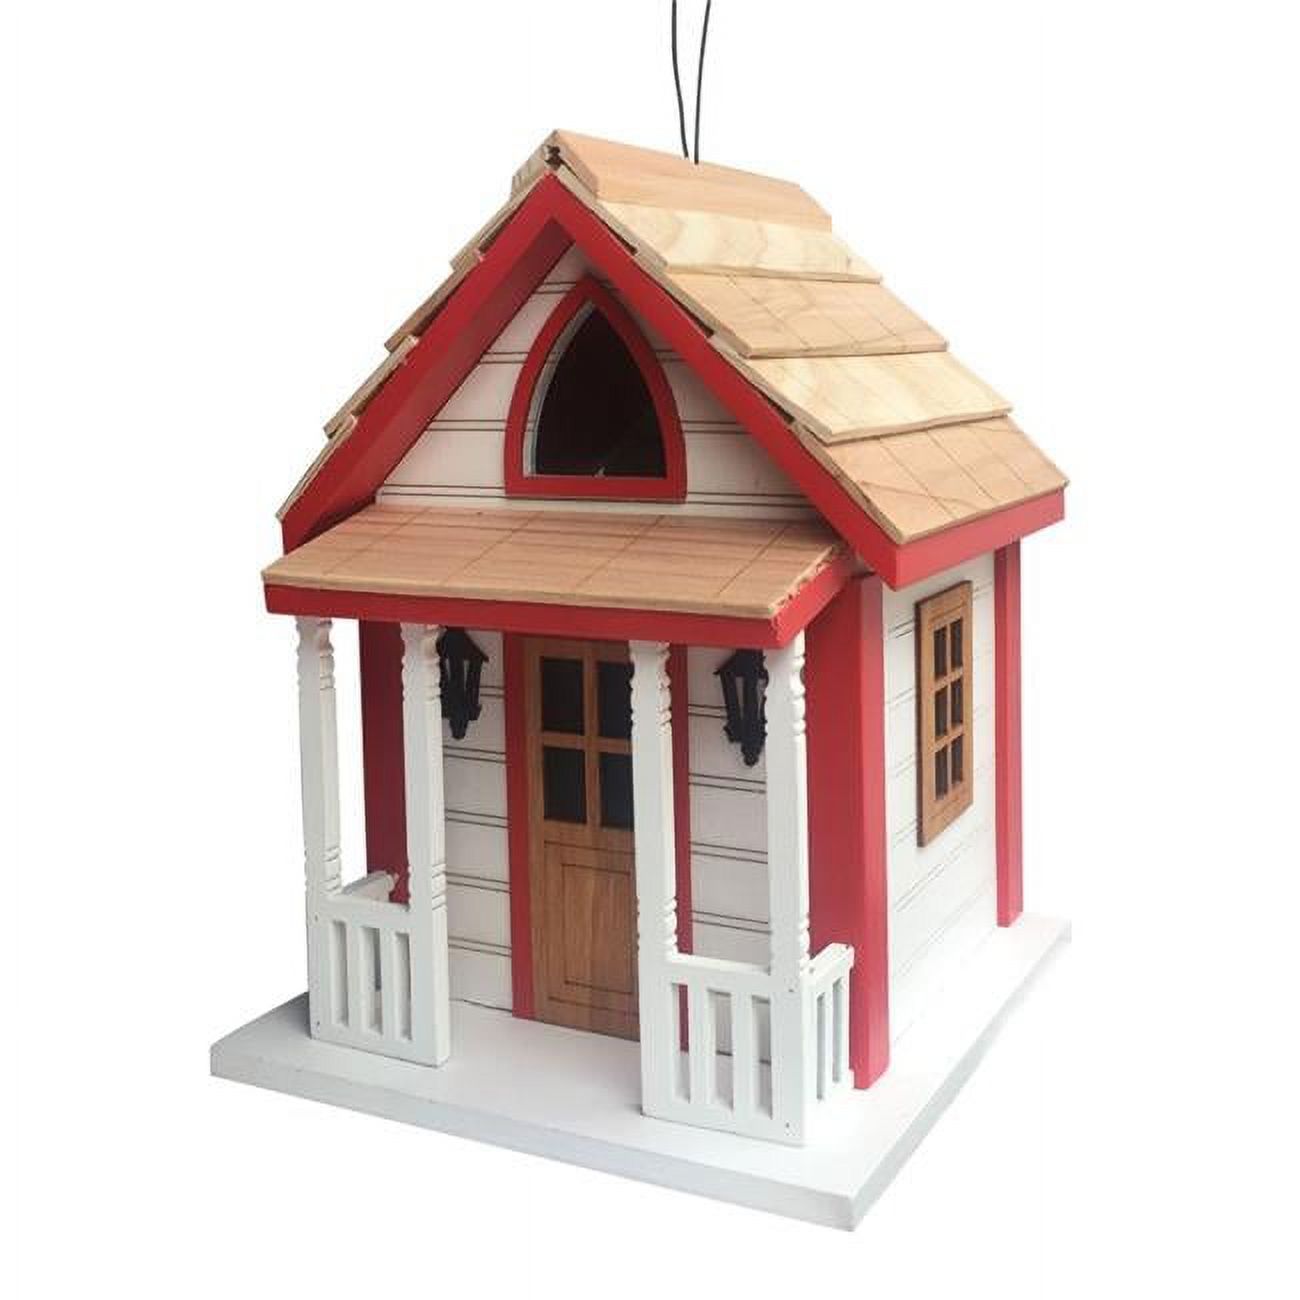 Home Bazaar Country Charm Cottage Birdhouse - image 1 of 2